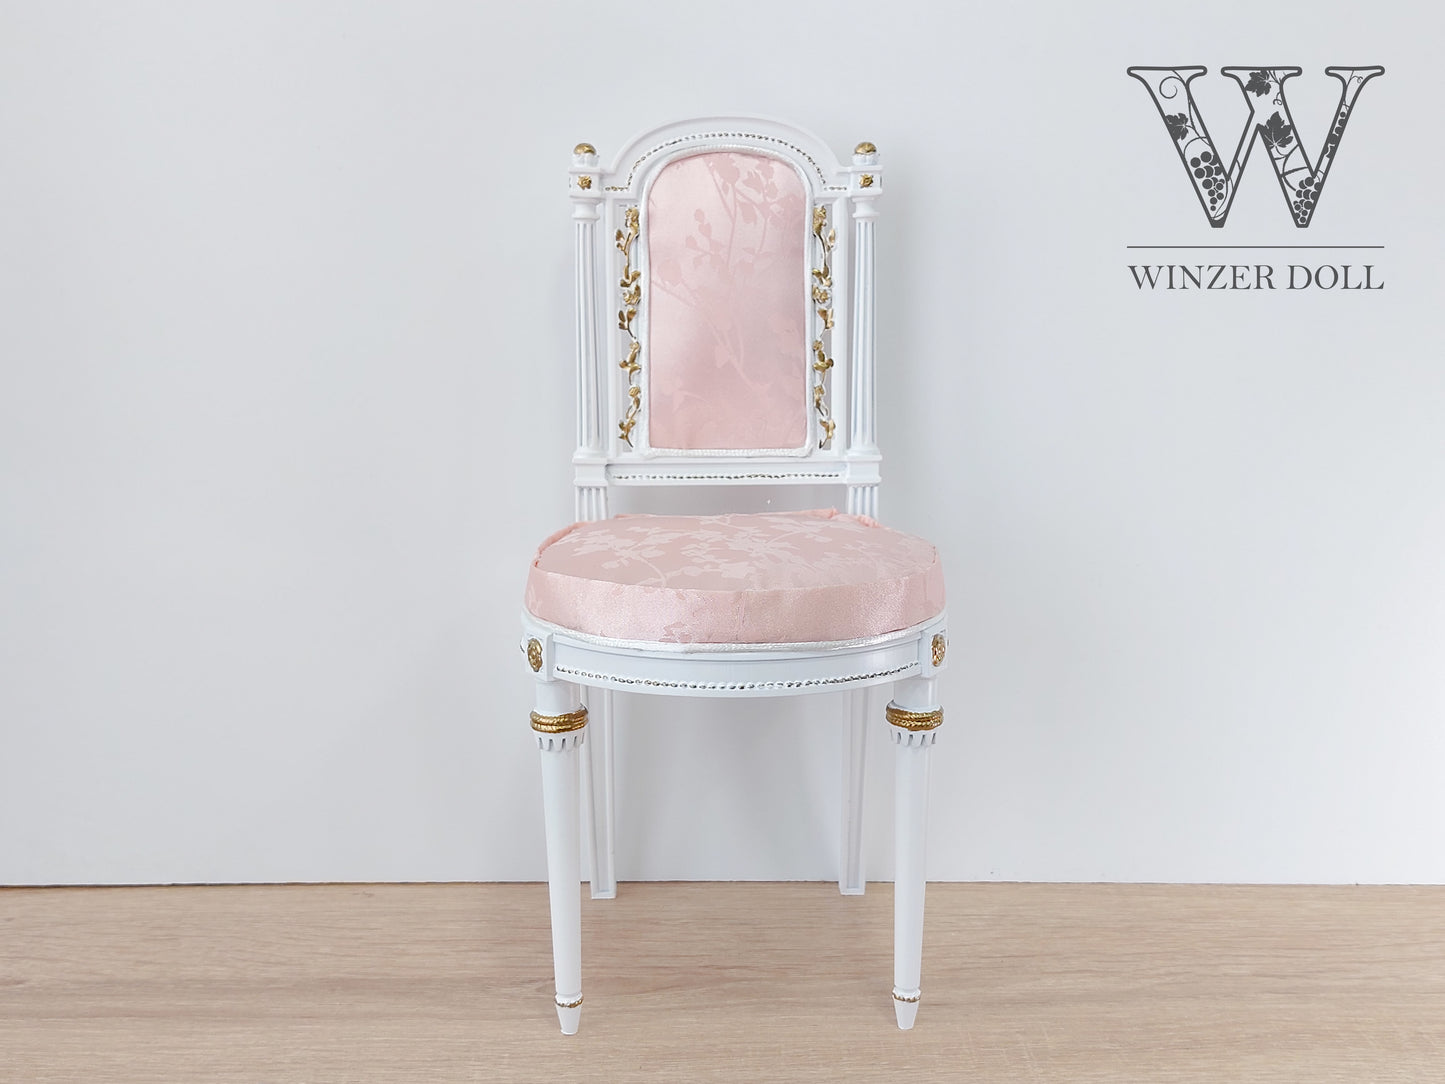 Classical chair, Marie Antoinette style, white & pink